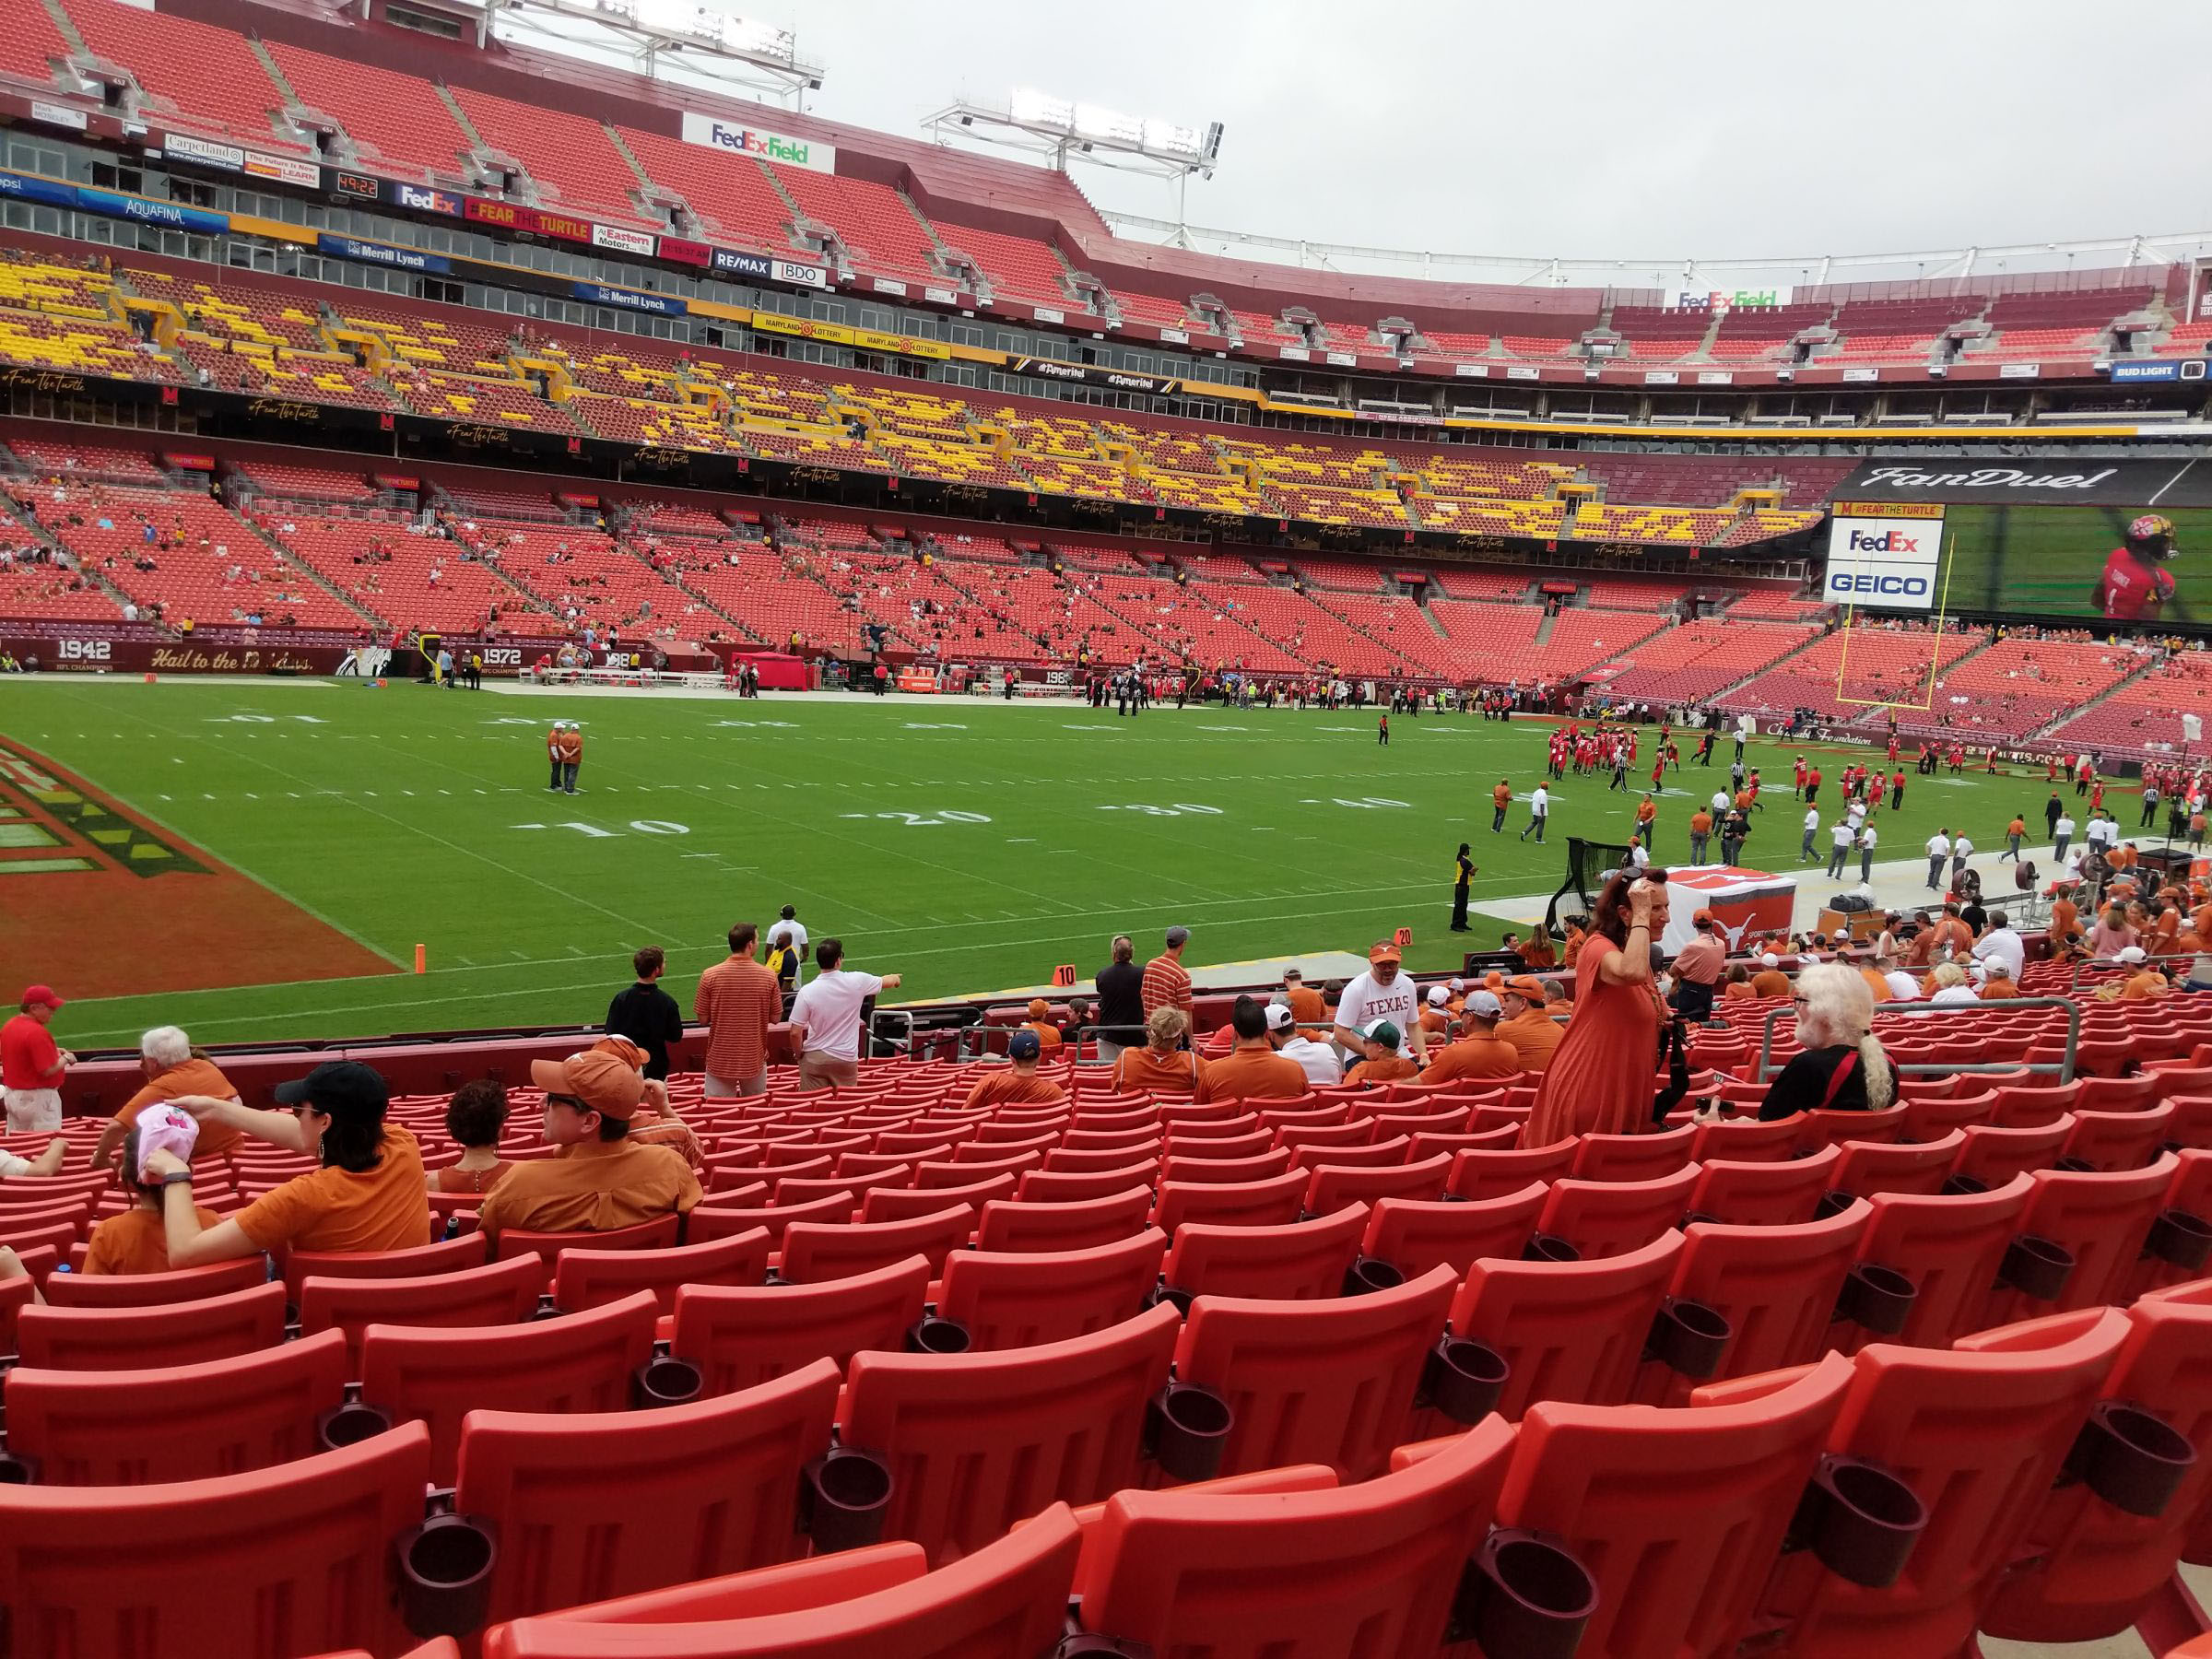 section 126, row 21 seat view  - fedexfield